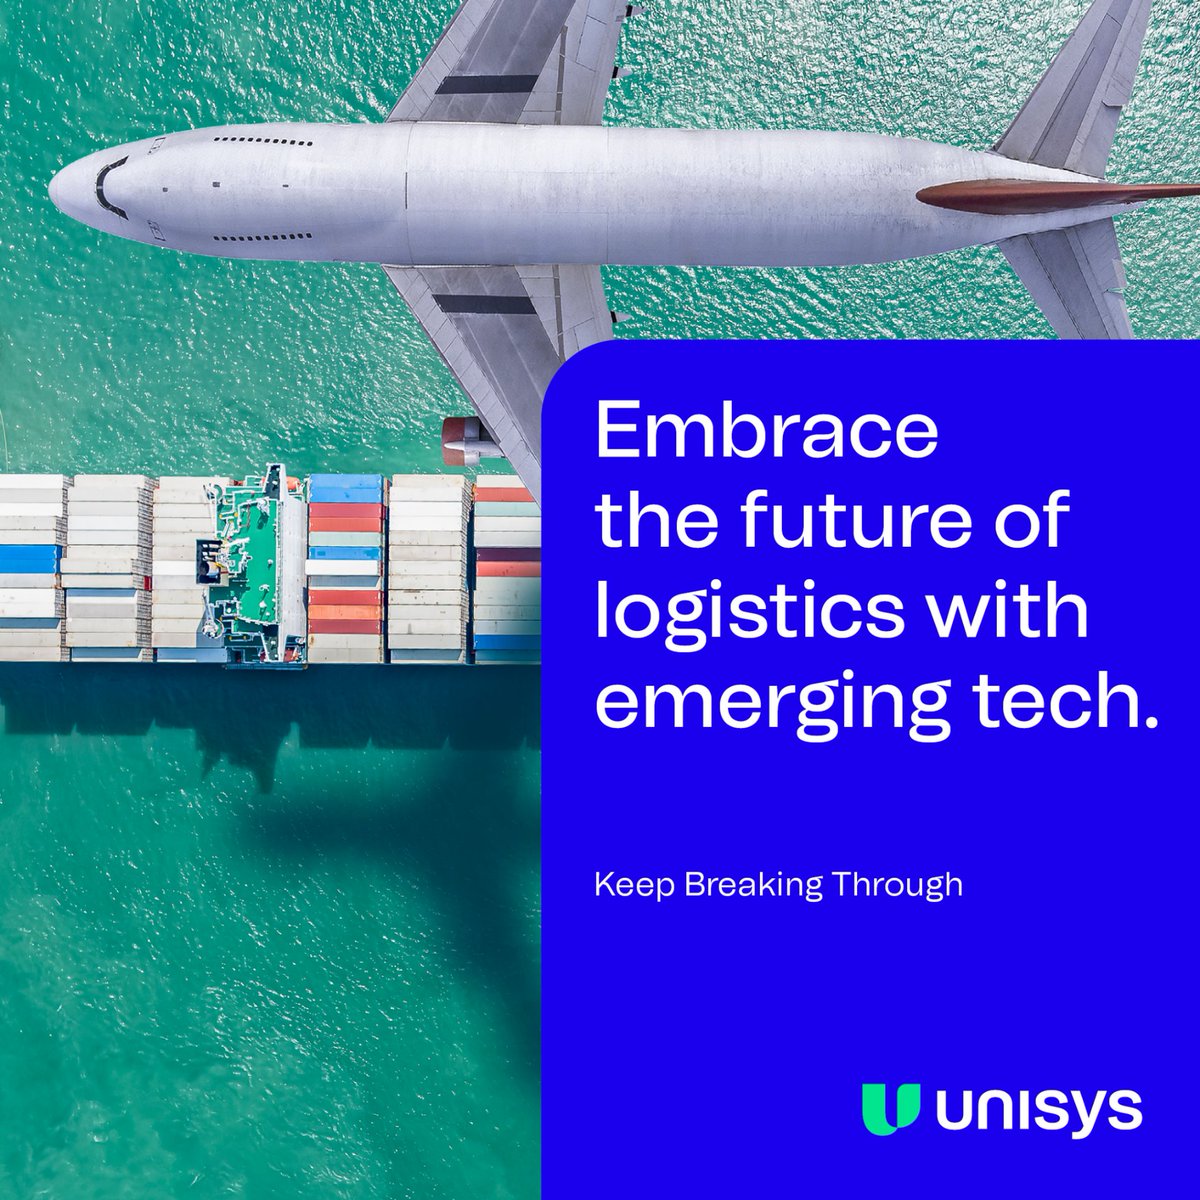 #Airlines and #freight forwarders, are pen-and-paper systems grounding your profits? Discover how @unisys' #AI load planning and quantum-speed demand forecasting can clear your runway to maximum margins. unisys.com/thought-leader…

#logisticsoptimization